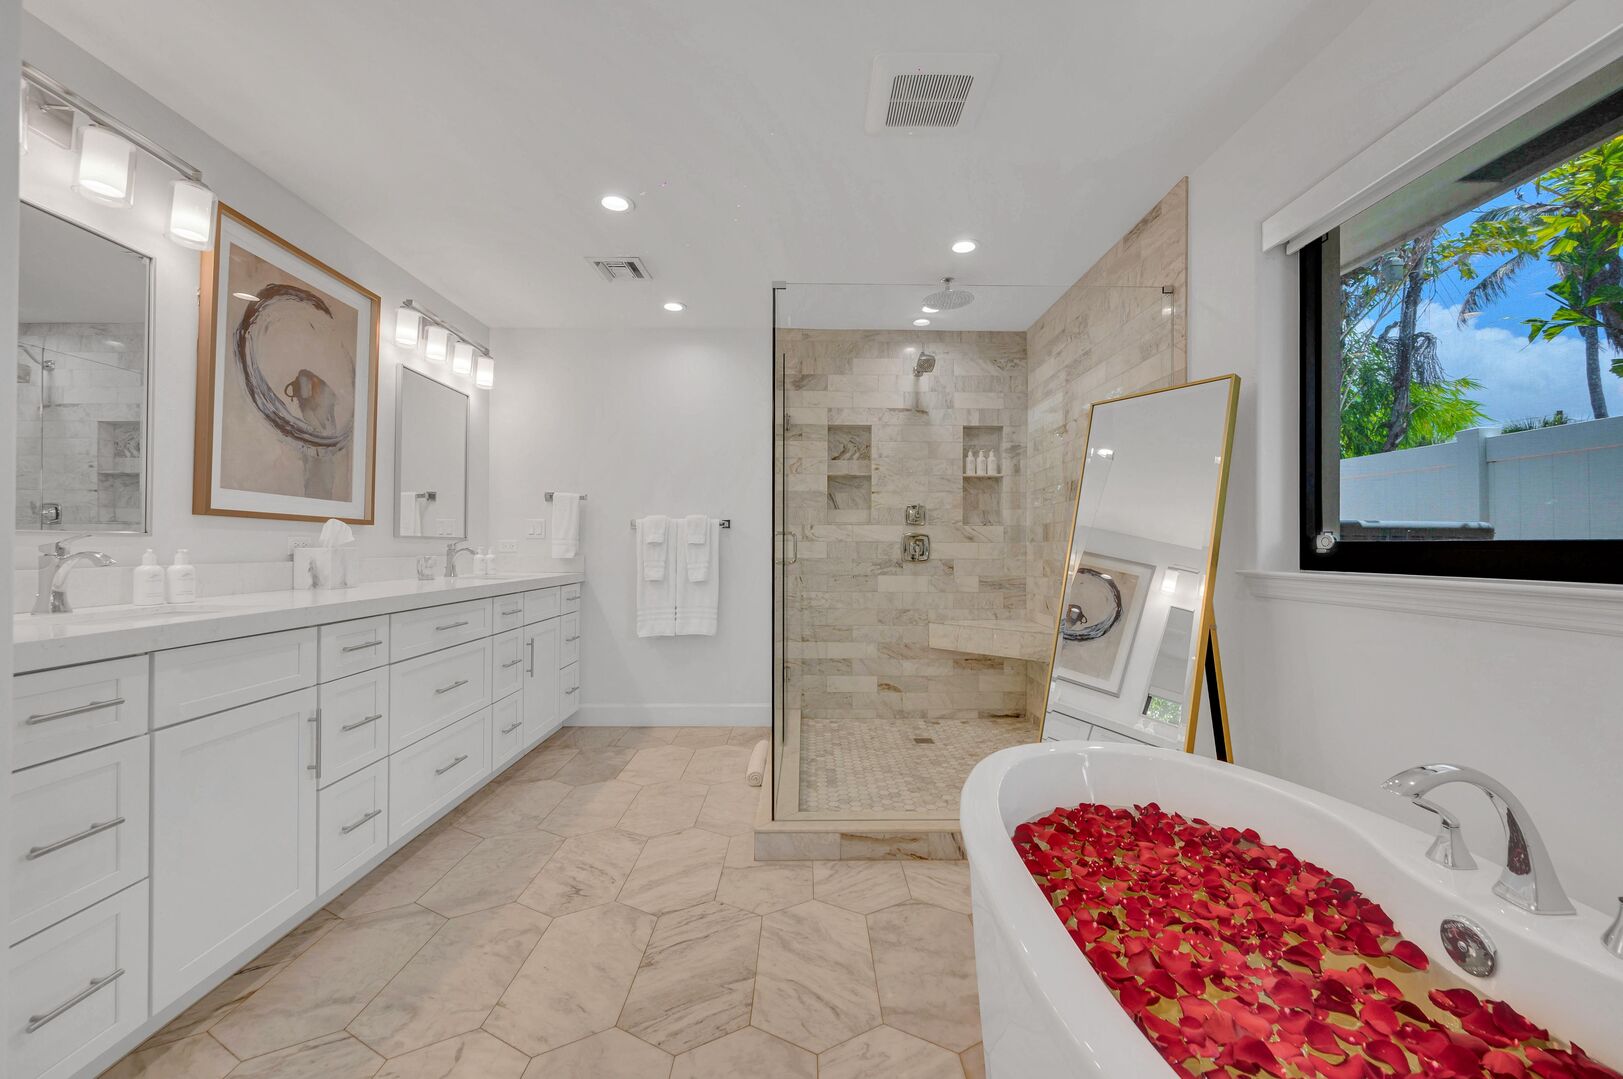 The master bathroom is spacious & updated. It includes a Soaking Tub and Walk-in Shower